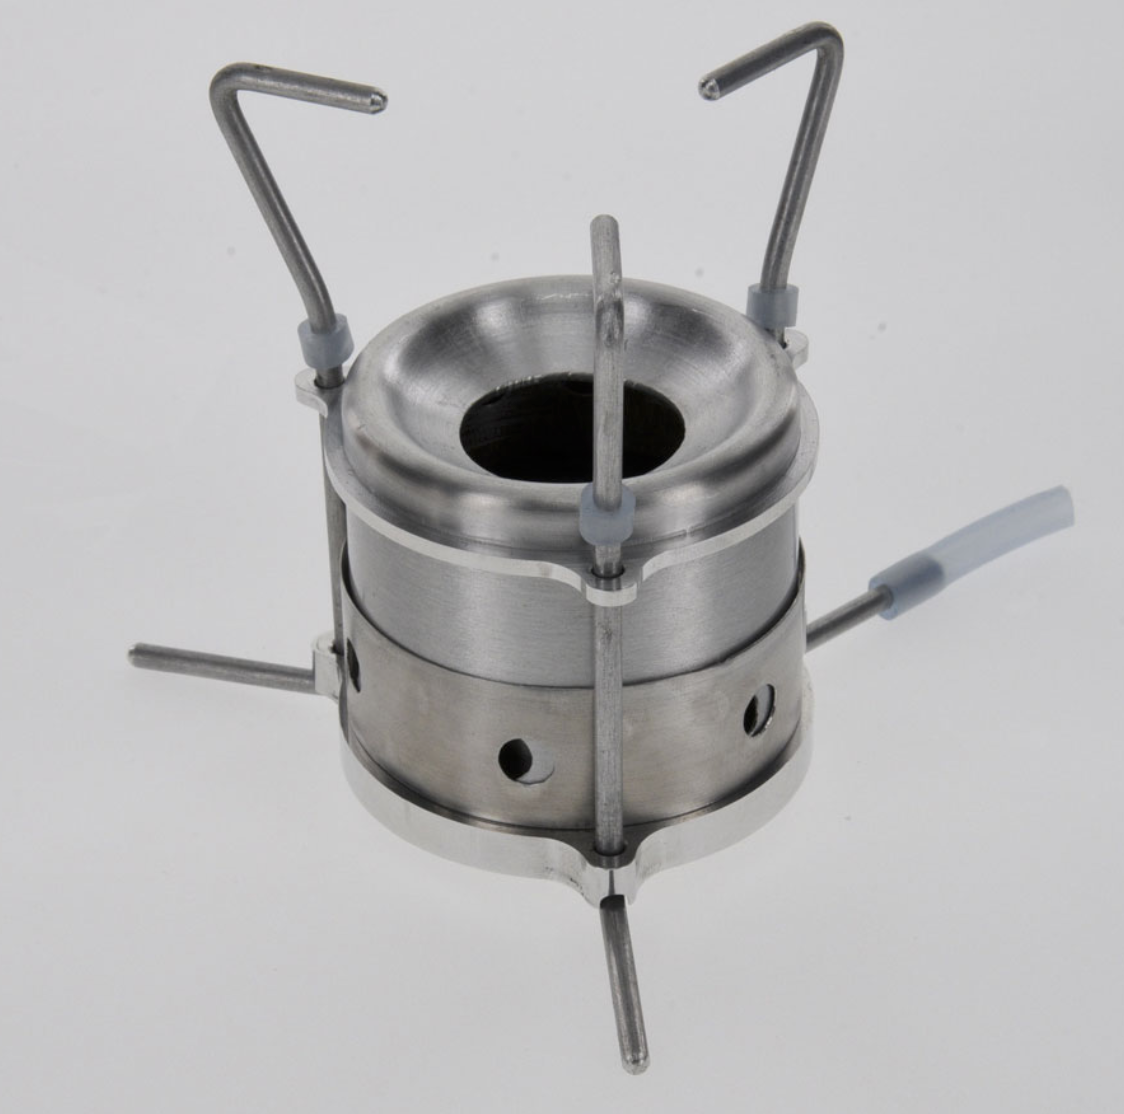 BS 1.1 Adjustable flame stove - Backpacking Light